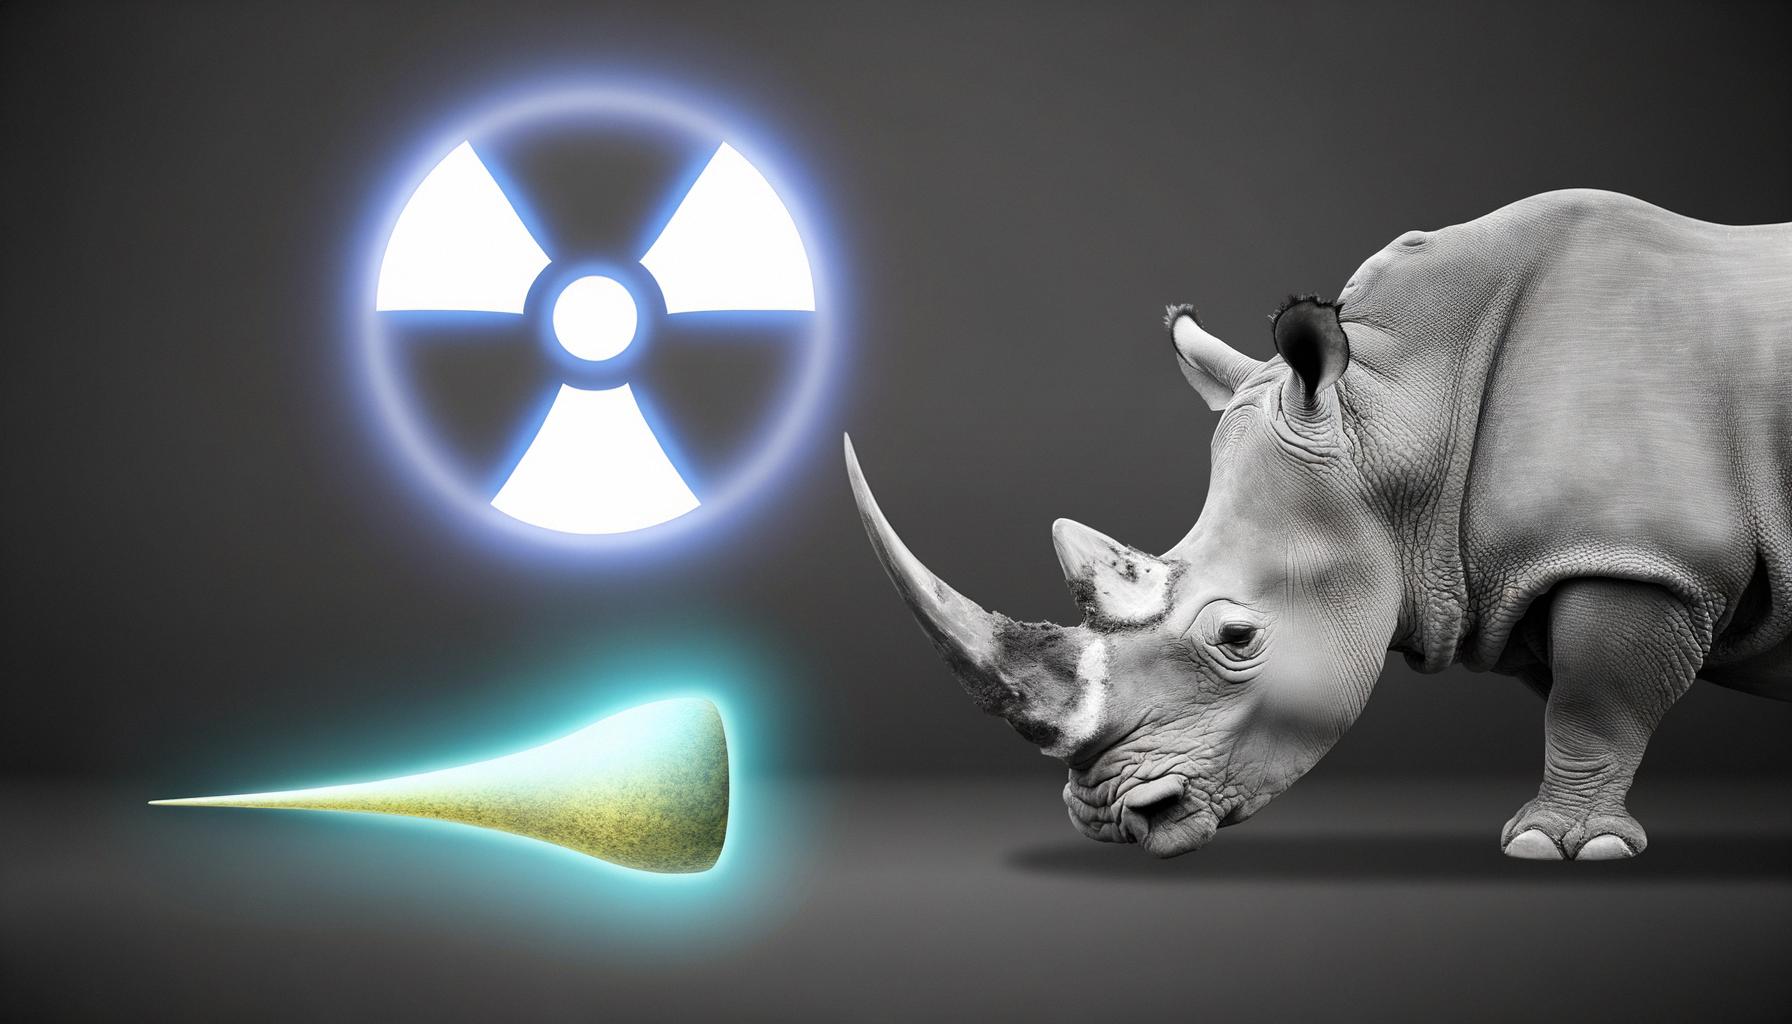 Rhino horns made radioactive to deter poaching and facilitate detection.